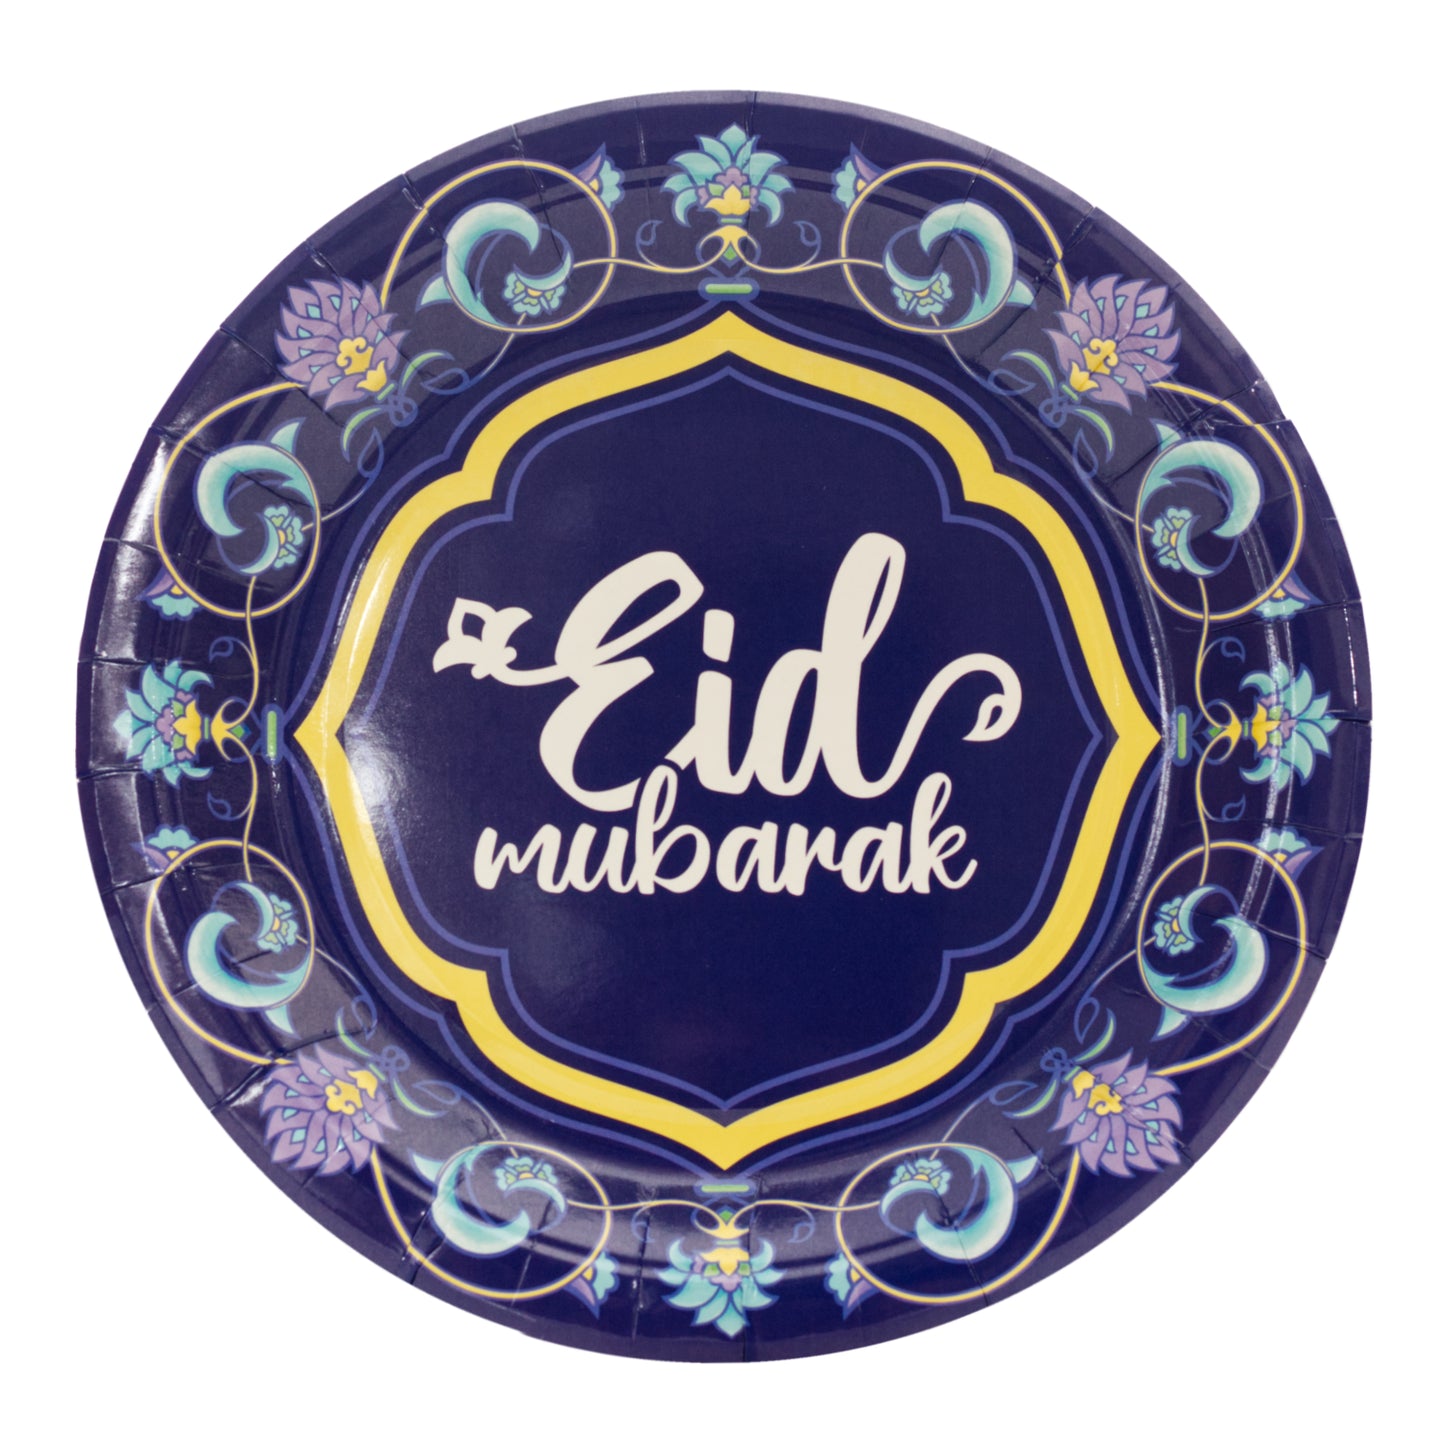 Eid Galaxy Garden Plate and Cup Set - 10pk